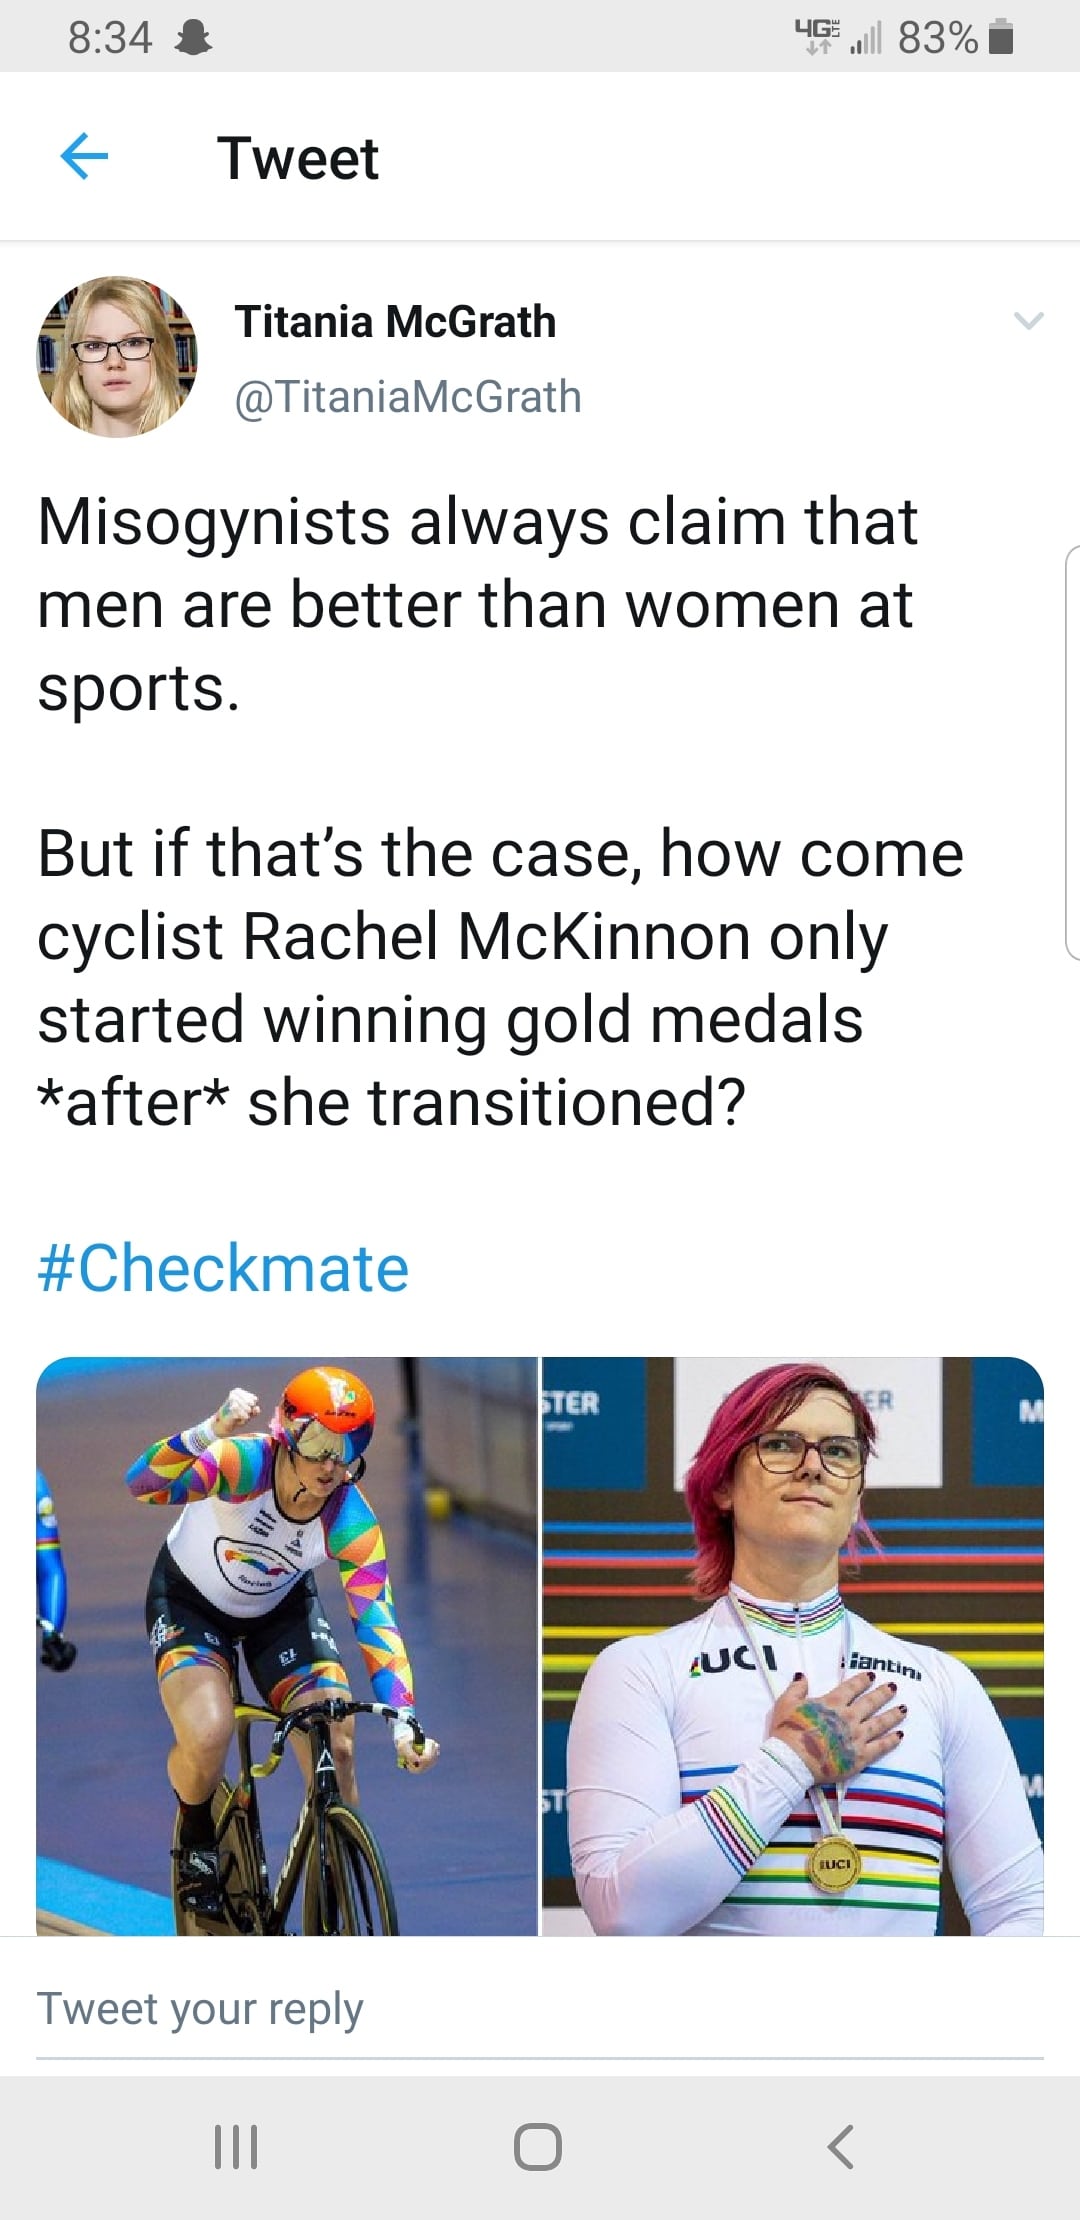 nsfw offensive-memes nsfw text: 8:34 & Tweet Titania McGrath @TitaniaMcGrath 83% • Misogynists always claim that men are better than women at sports. But if that's the case, how come cyclist Rachel McKinnon only started winning gold medals *after* she transitioned? #Checkmate Tweet your reply 